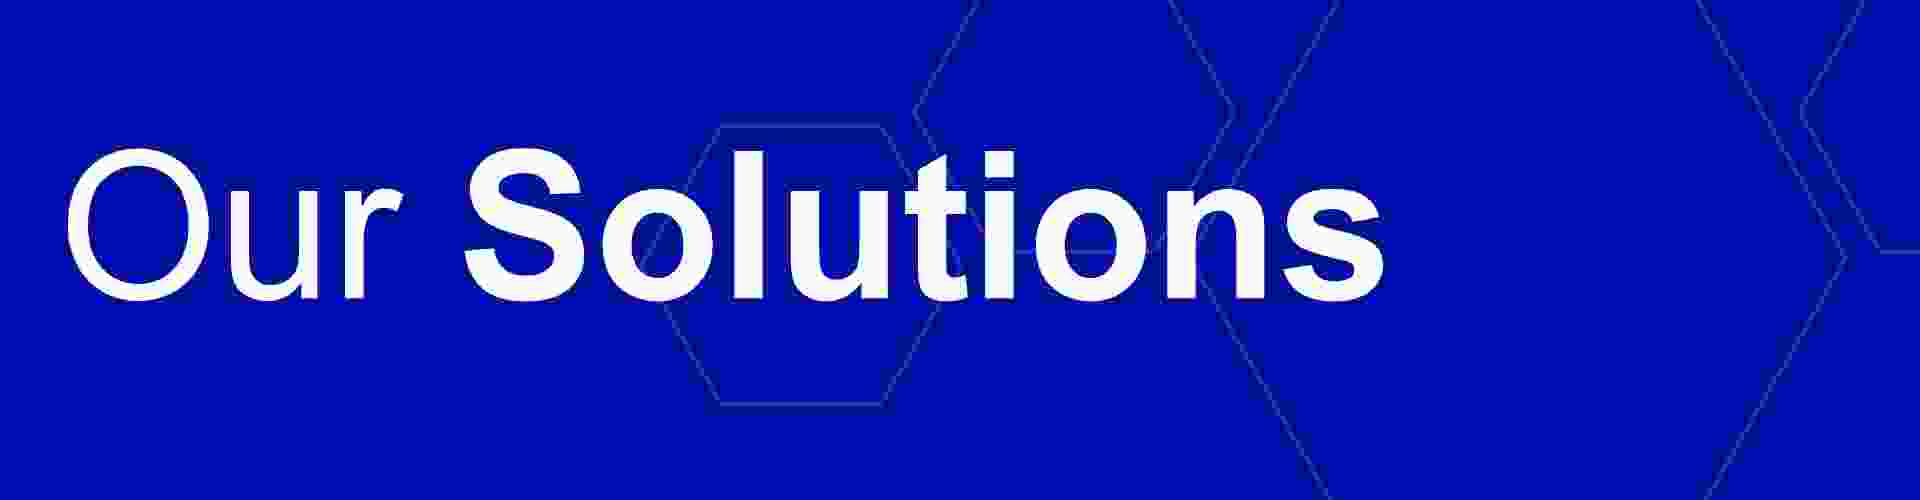 our-solutions-banner.png